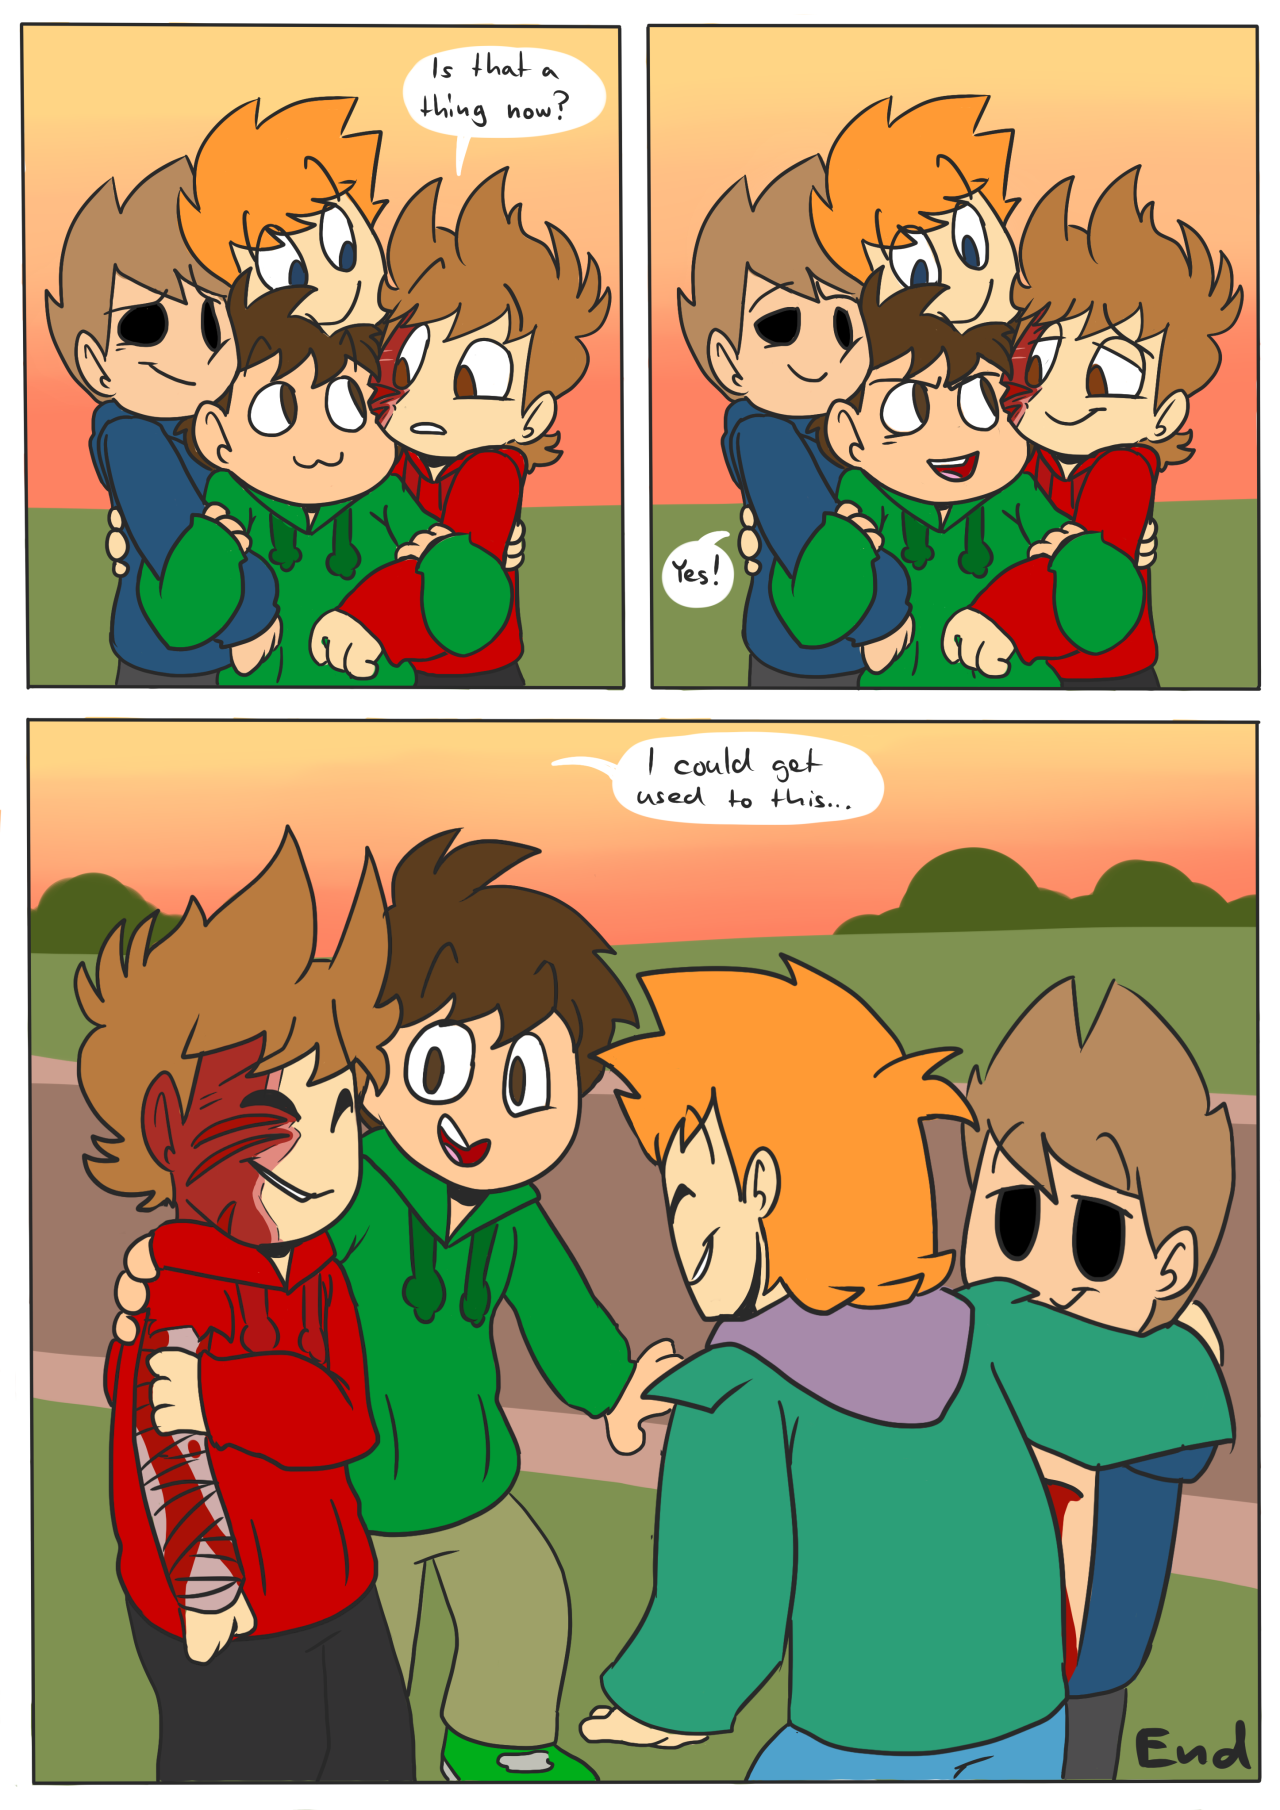 tEaL on X: I'm guilty. anyone else, too? - : #Eddsworld Character:  Matt, Tom, Tord, Edd Artstyle: Eddsworld - It's a redraw of a frame in The  End  / X